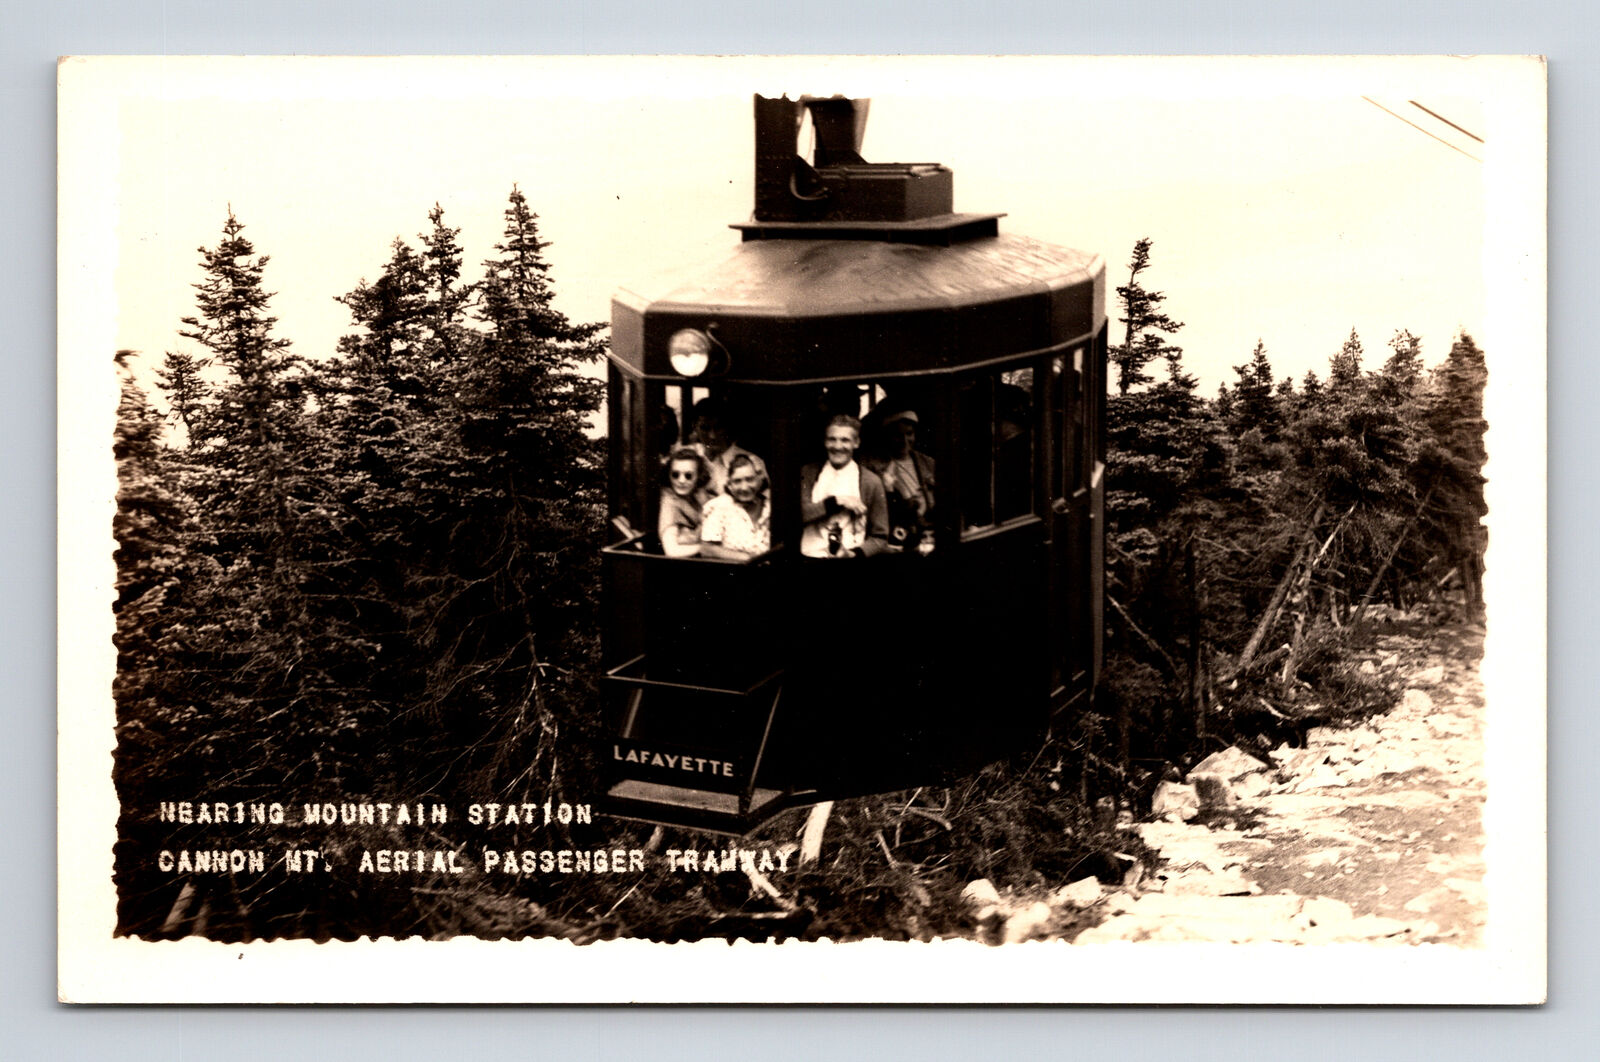 RPPC Aerial Tramway Nearing Cannon Mountain Station Franconia Notch NH Postcard